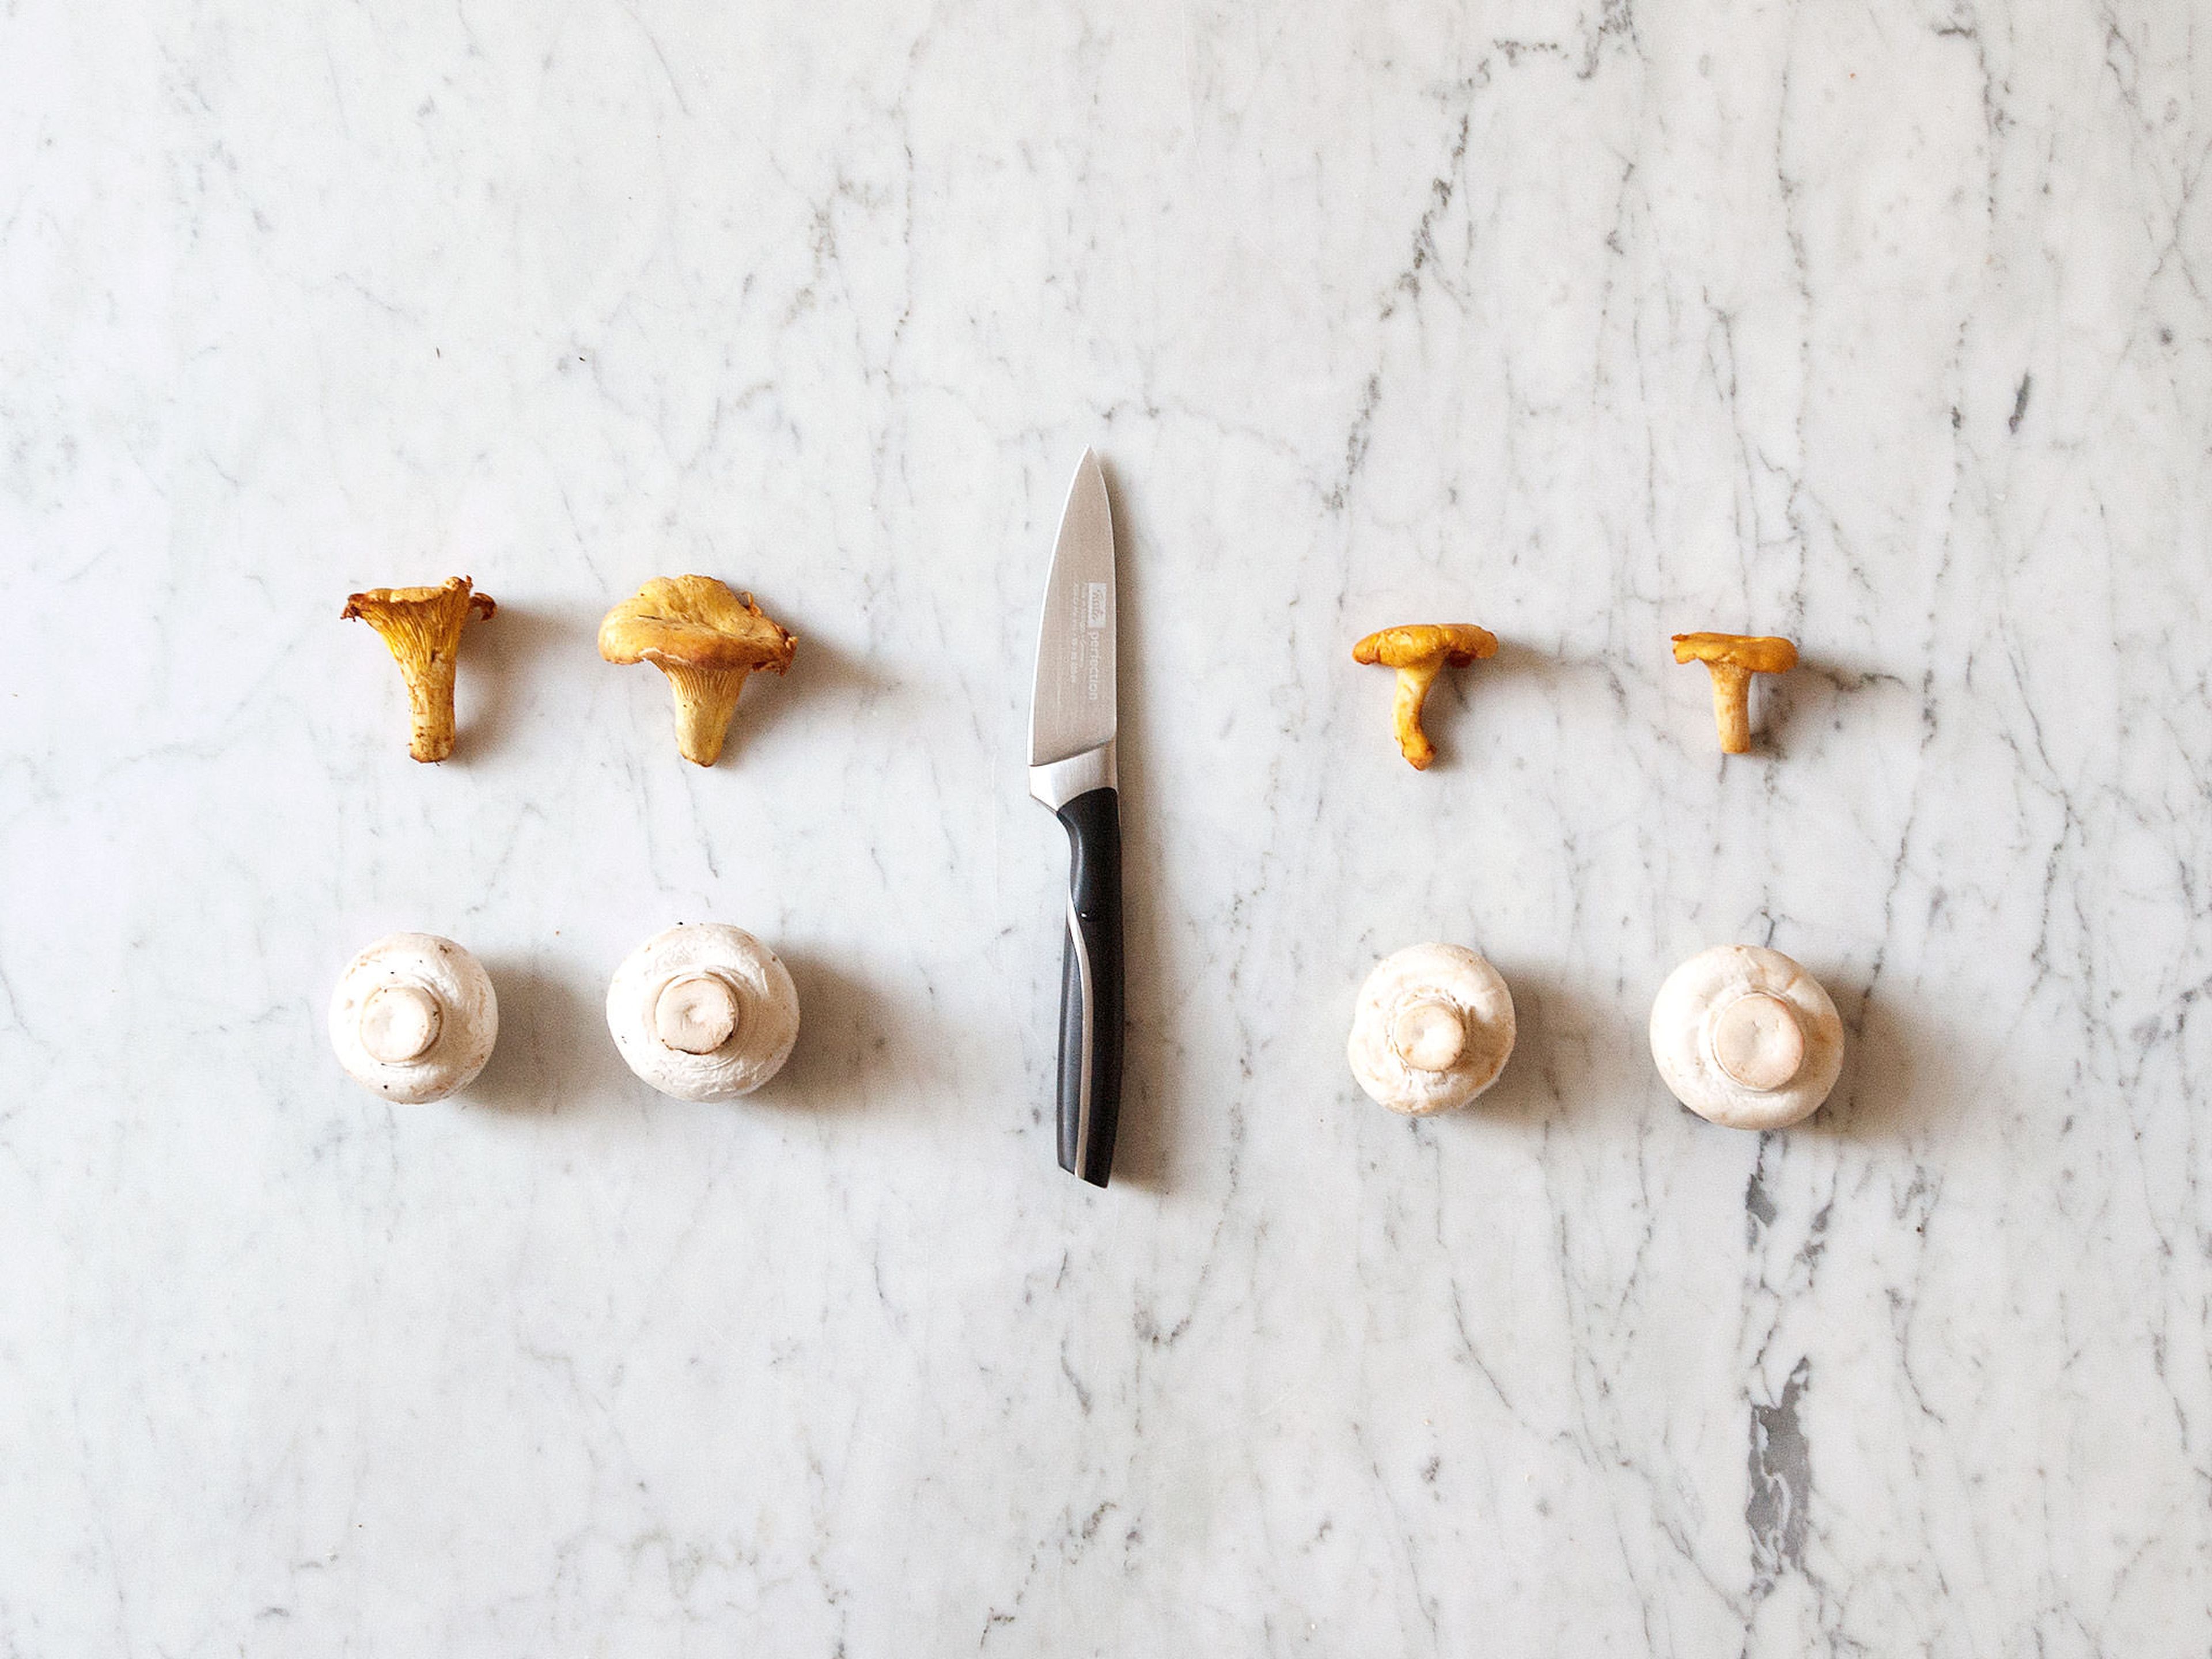 How to clean mushrooms